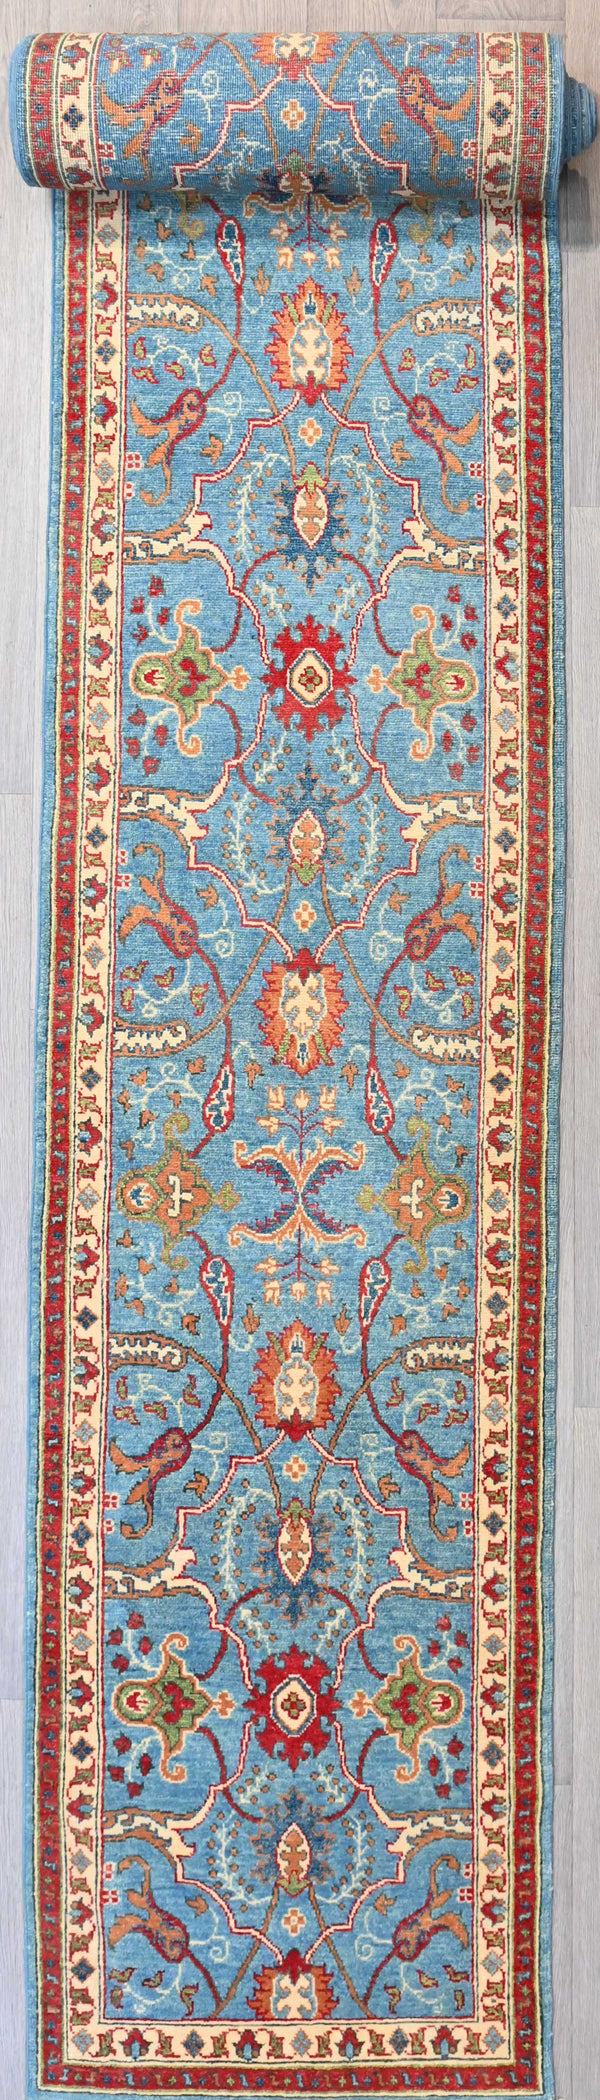 Extra Long Handknotted Pure Wool Vegetable Dye Afghan Chobi Runner w/ Blue and Red Tones (H771 x W77)